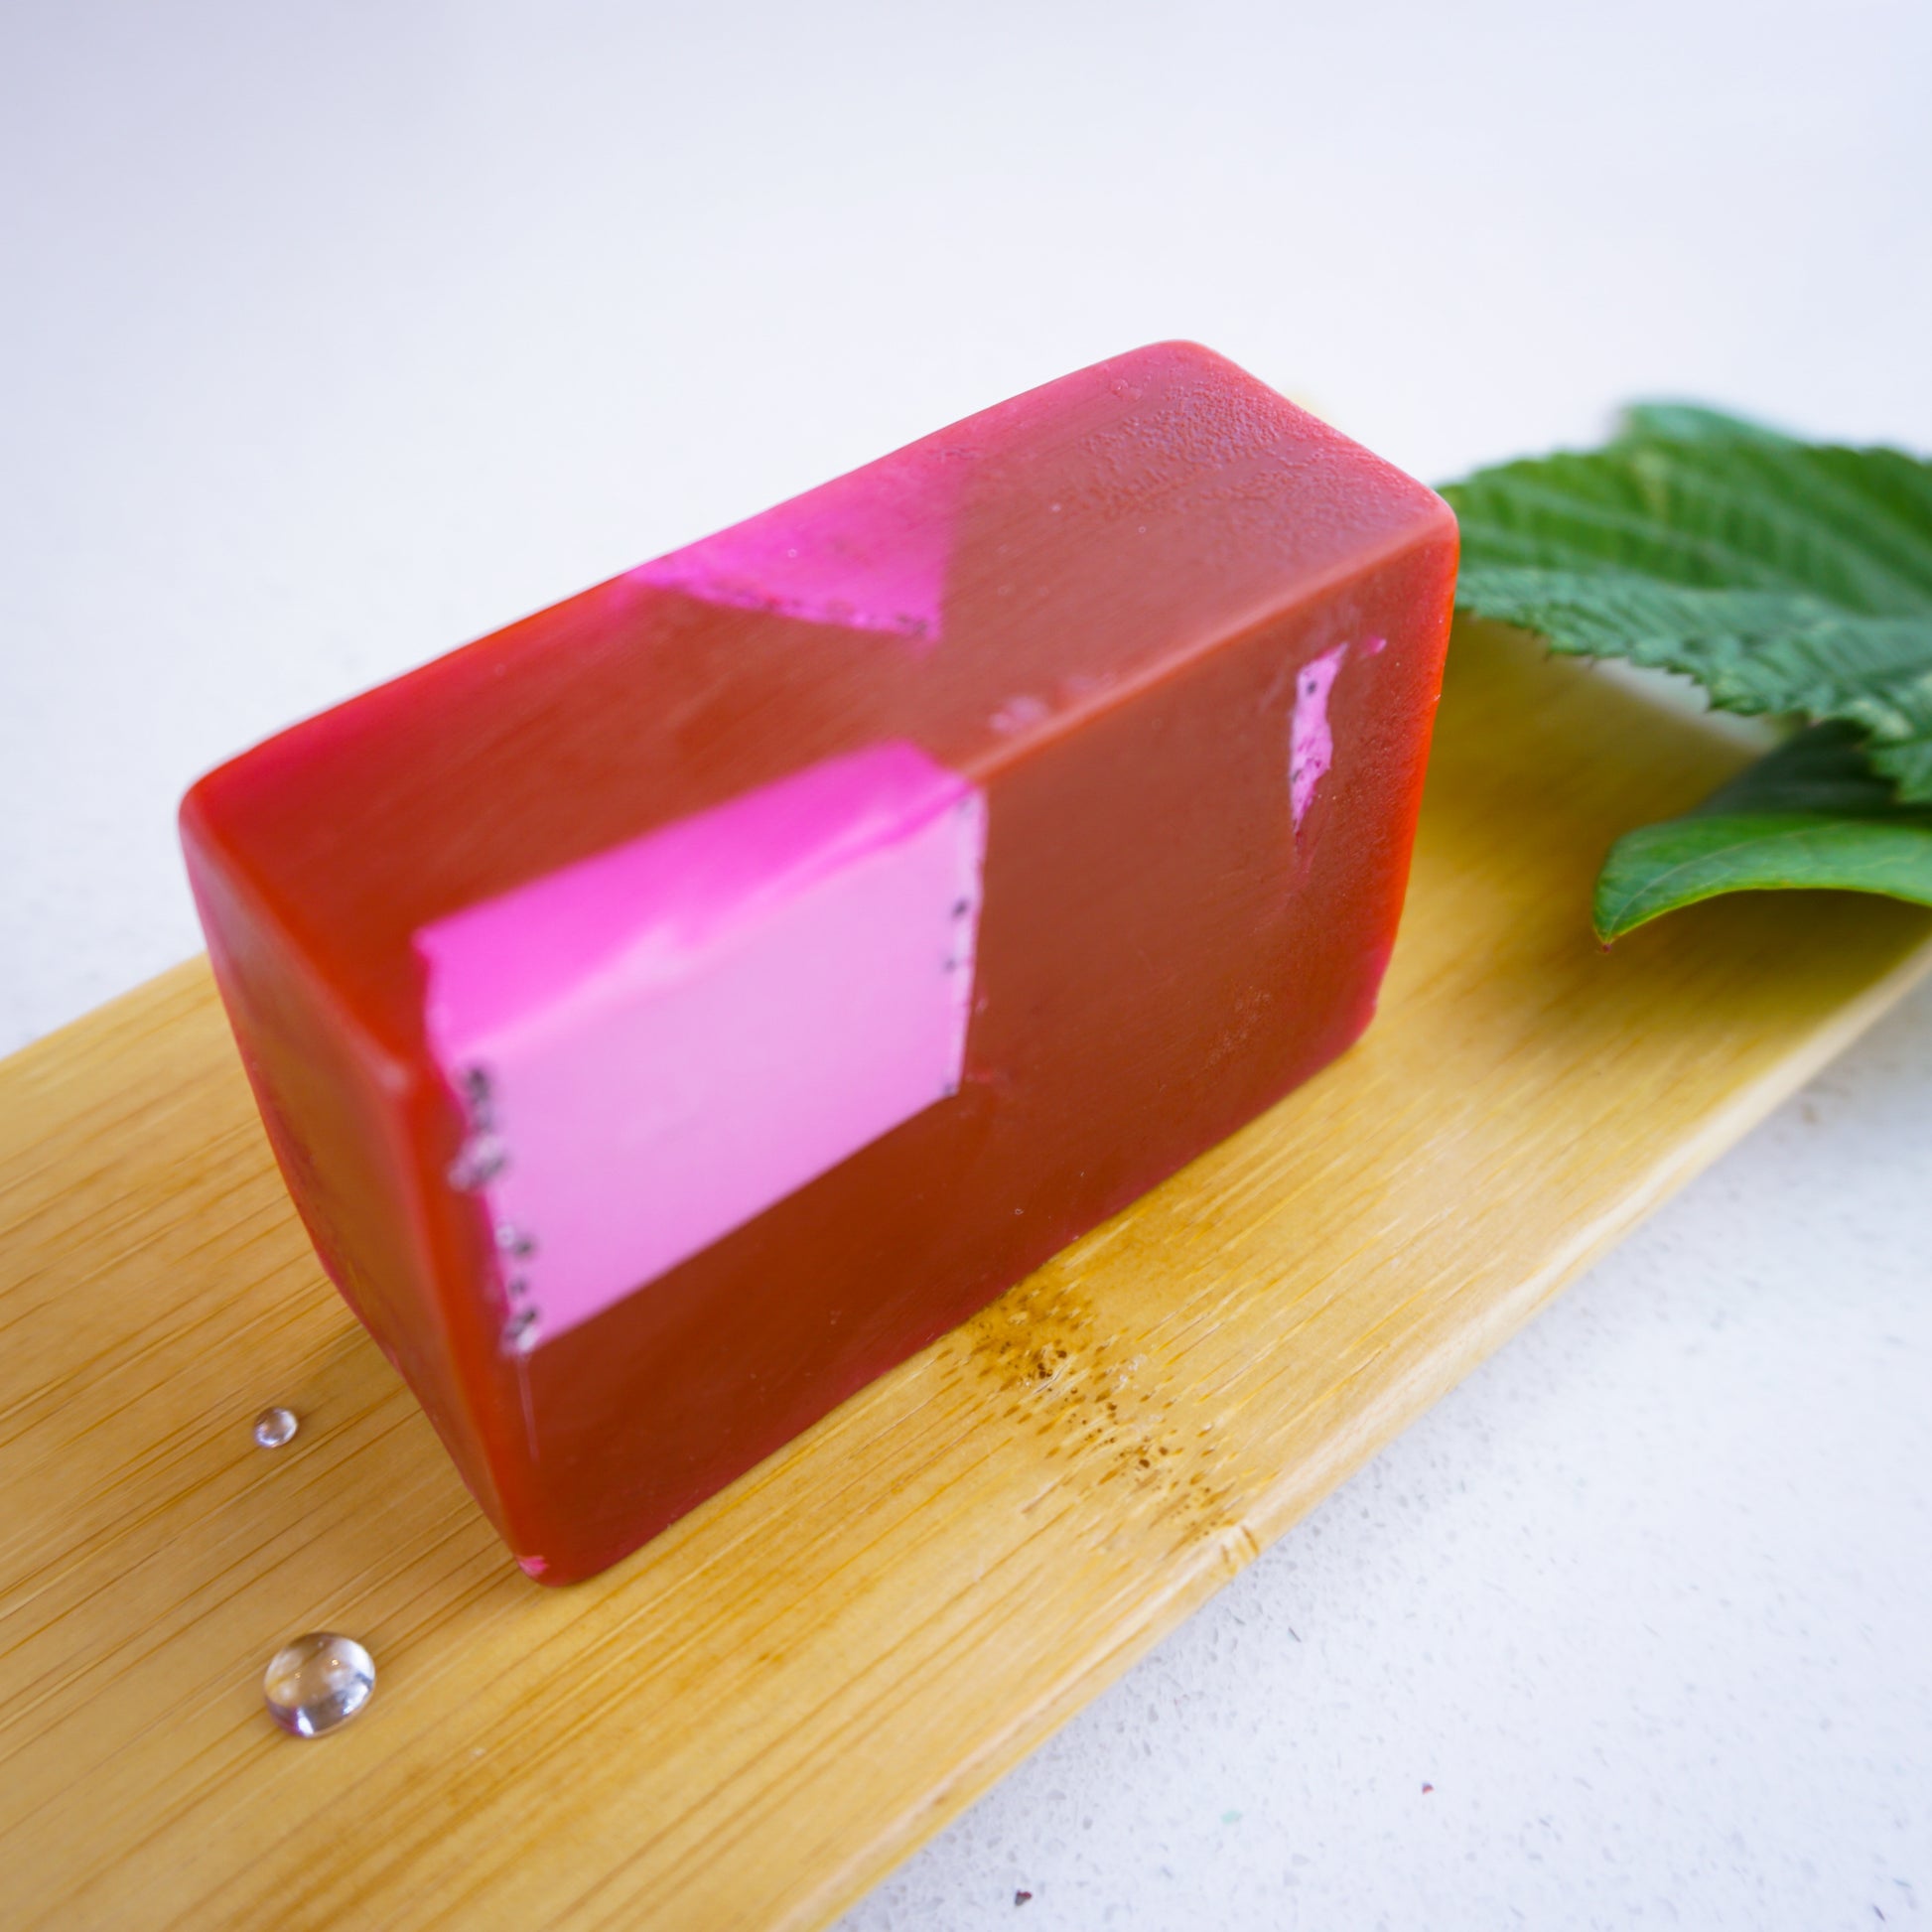 Black Raspberry and vanilla soap bar with water droplets sitting on bamboo tray